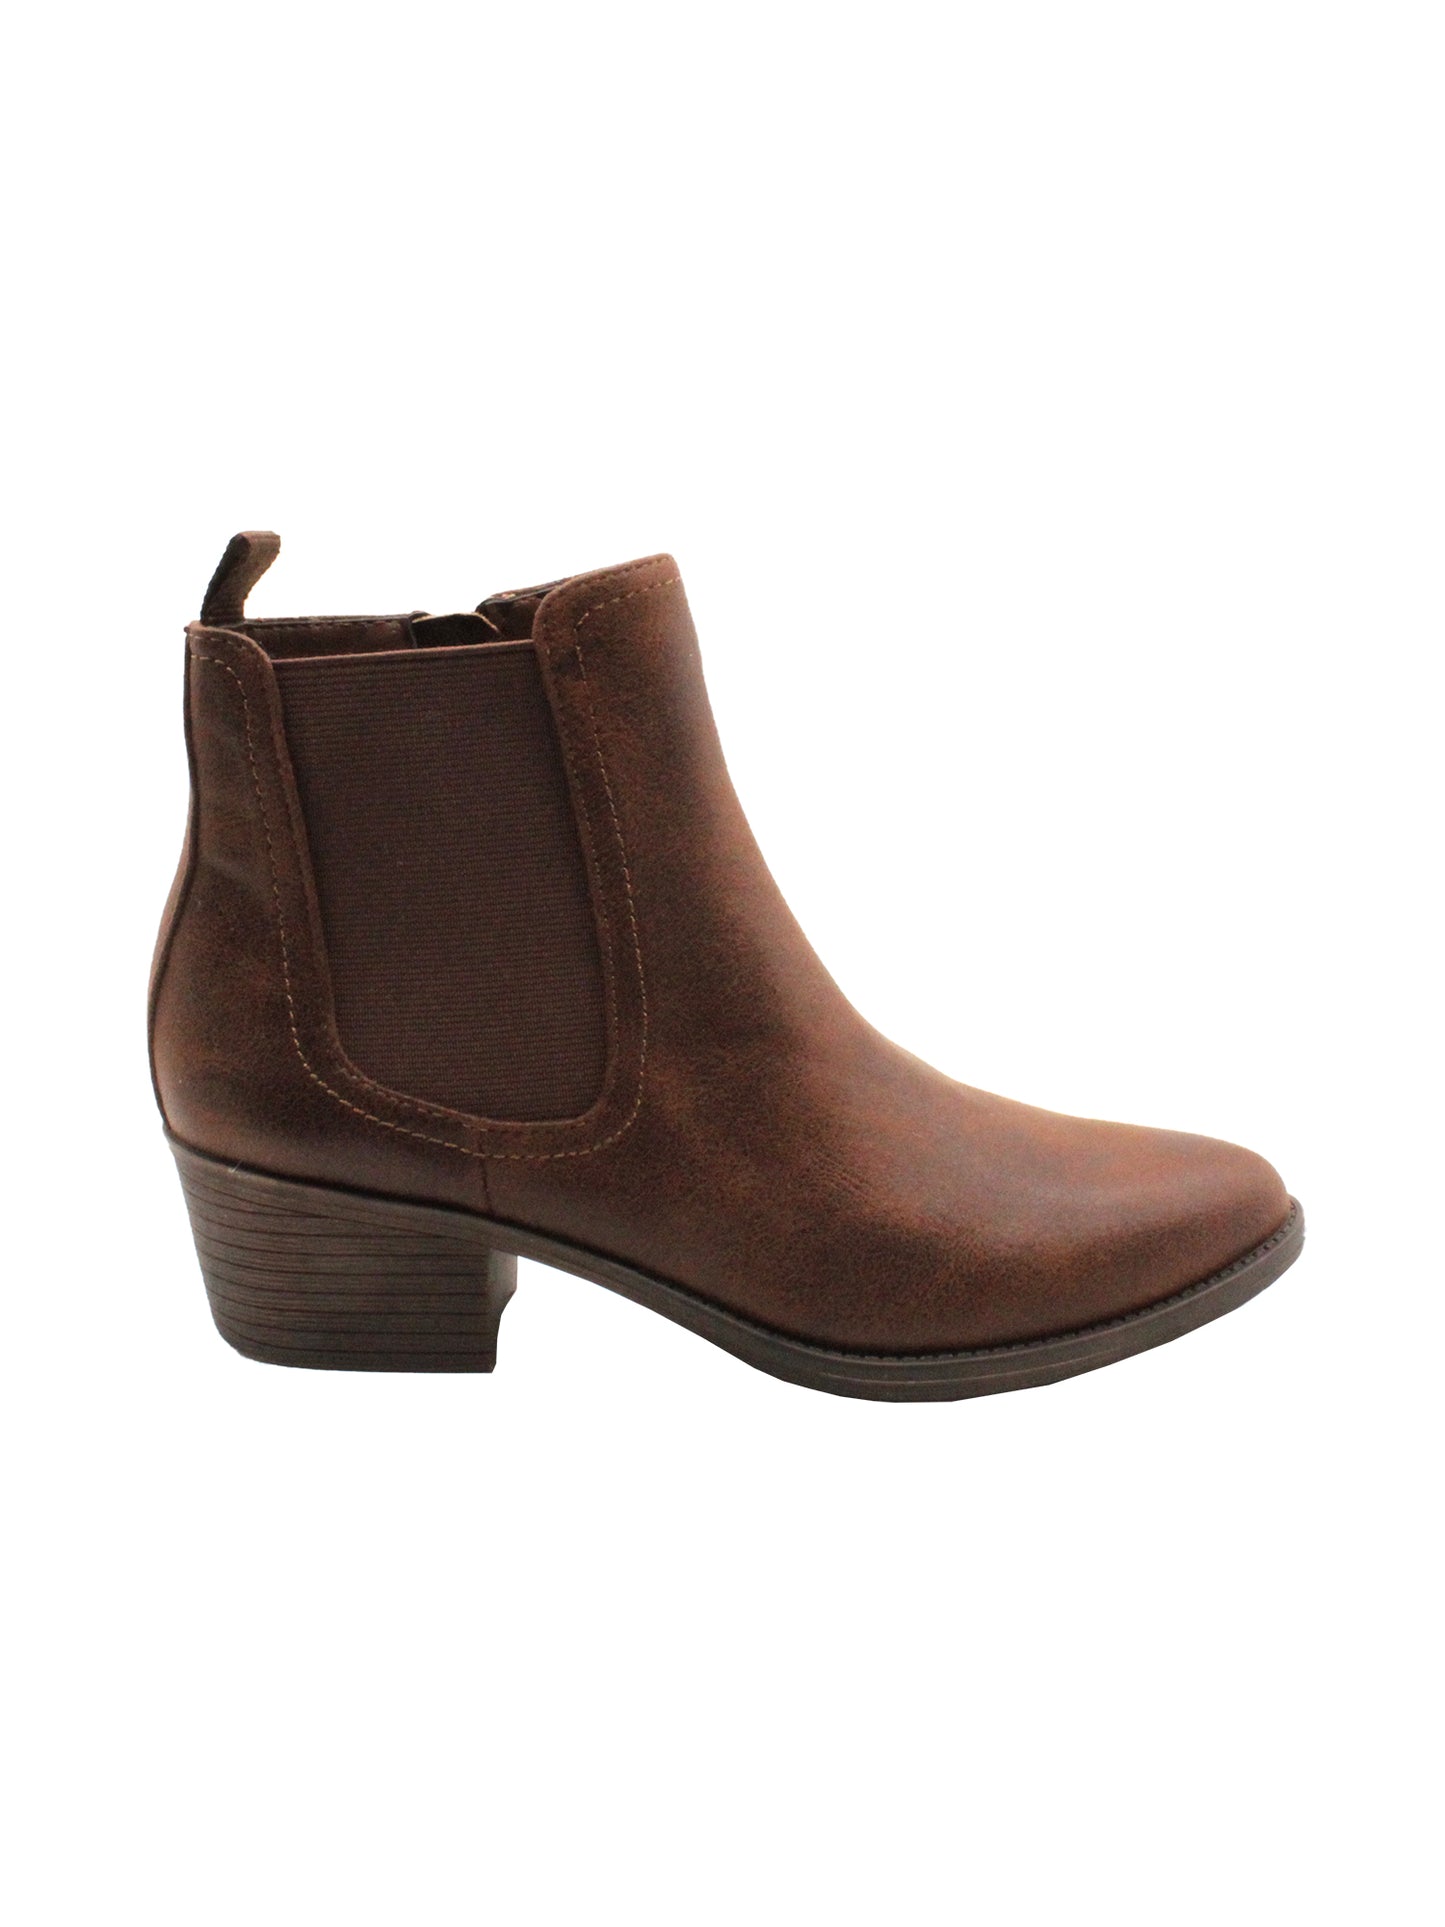 The ‘Carriage’ Chelsea bootie by Volatile, in beautiful rustic effect faux leather or matte metallic faux snake, is right on trend with a wide elastic side panel allowing for flexibility and comfort while walking. We took the level of ease a step further by adding an inside zipper, making these booties effortless to put on and off.  brown